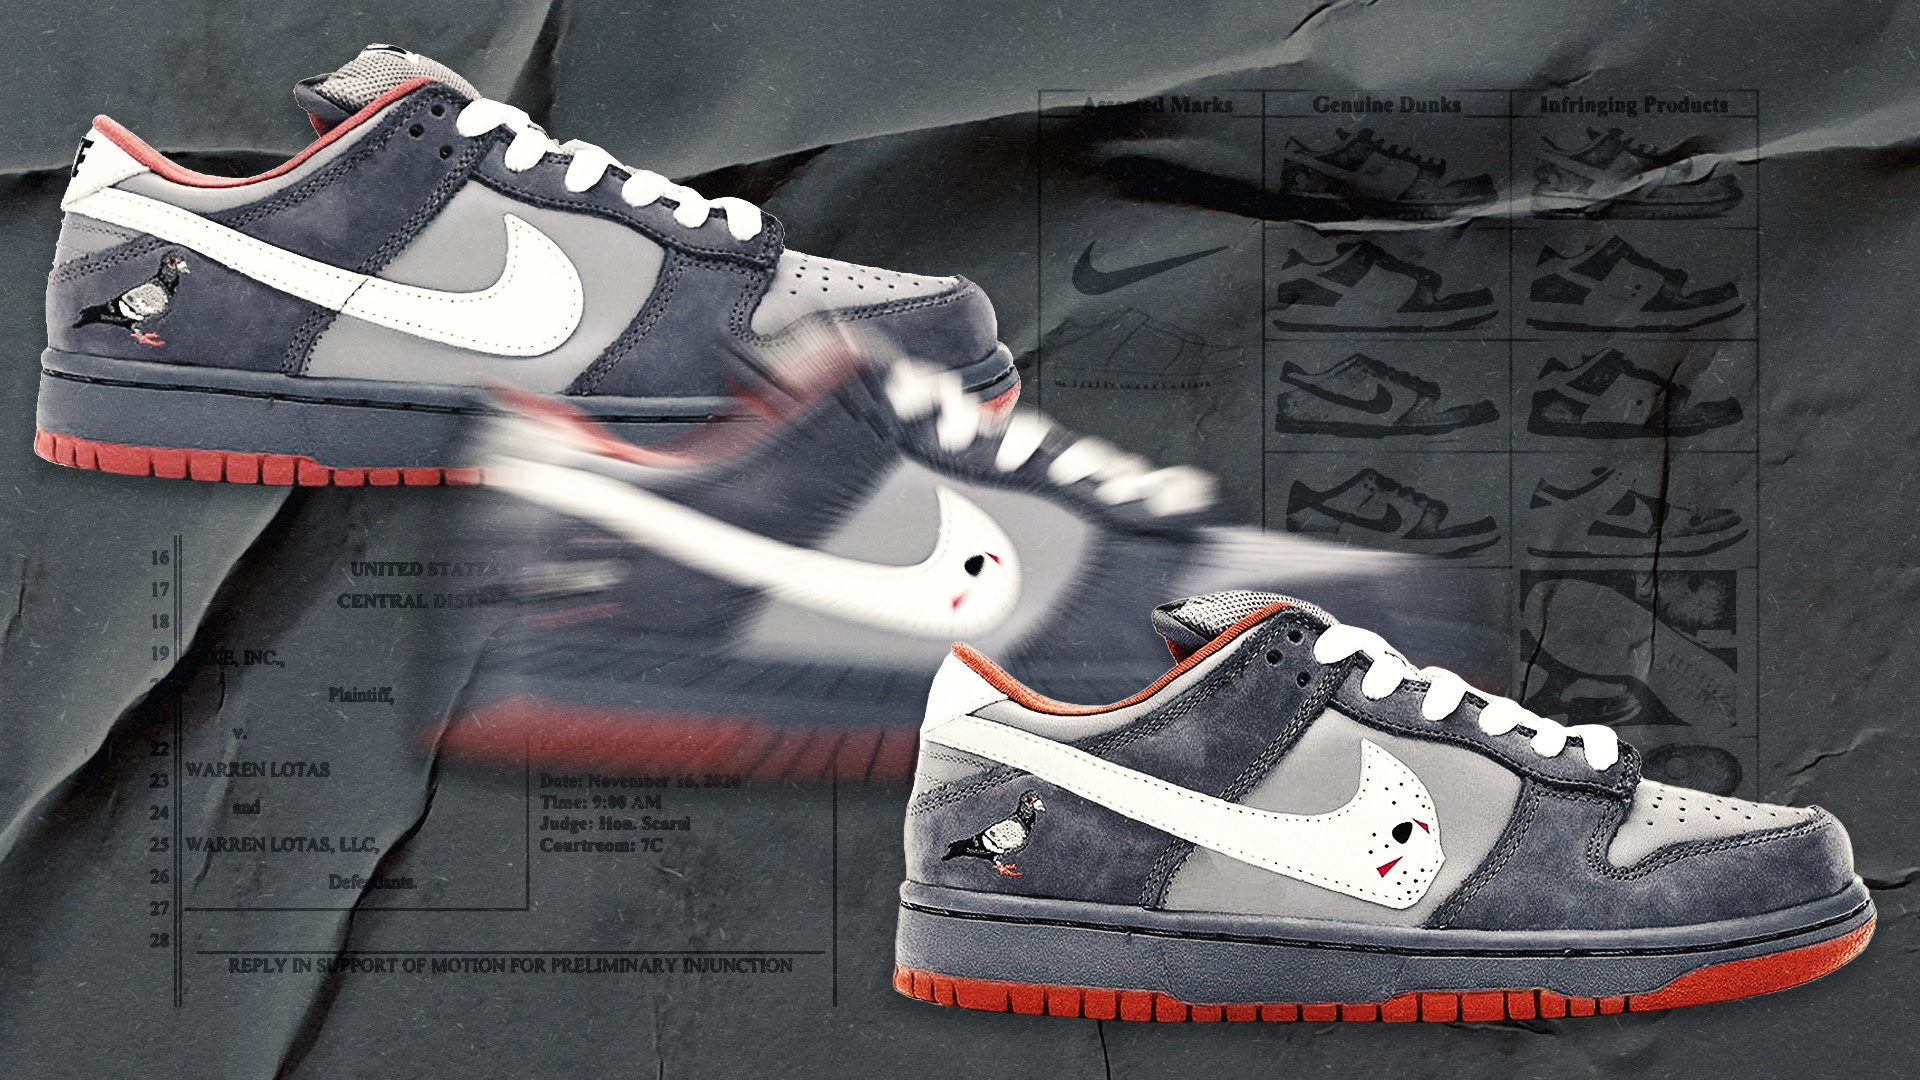 Nike v. Warren Lotas: The Bootleg Dunks and Their Place in